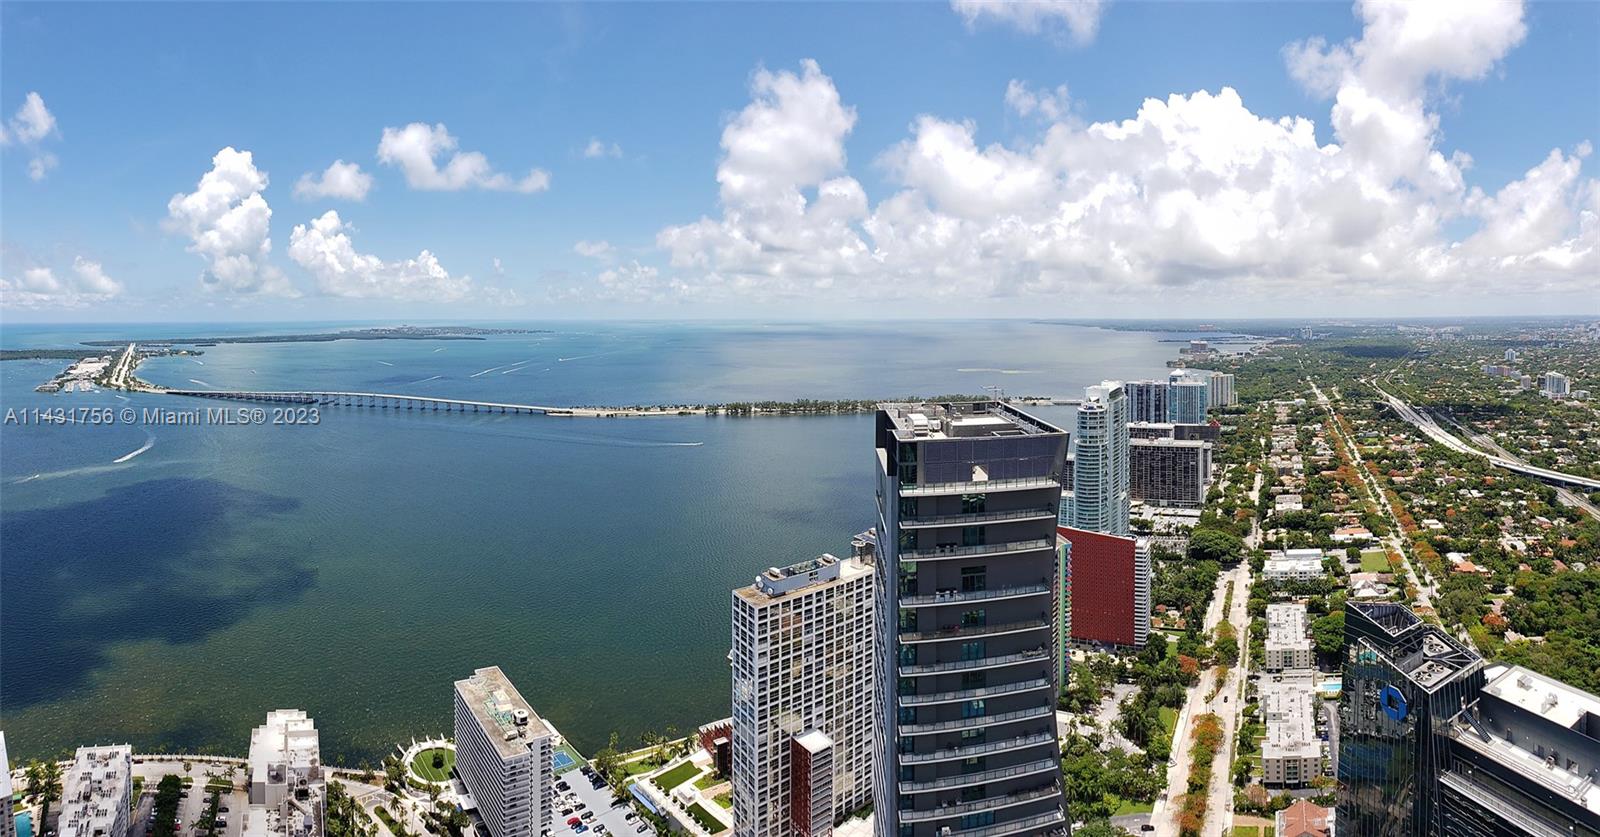 Home in the sky!! Unobstructed panoramic direct ocean views. Beautiful modern 2 bed 2 bath condo at exclusive Four Seasons Brickell. Unit features all custom interior doors, flow through design, top of the line appliances, 1 assigned parking space, 1 storage space and 2 gym memberships included. One of a kind condo on the 66th floor. All luxury service s provided by Four Seasons Hotel - Concierge, room service, gym, pool cabanas, etc...Easy to show!!